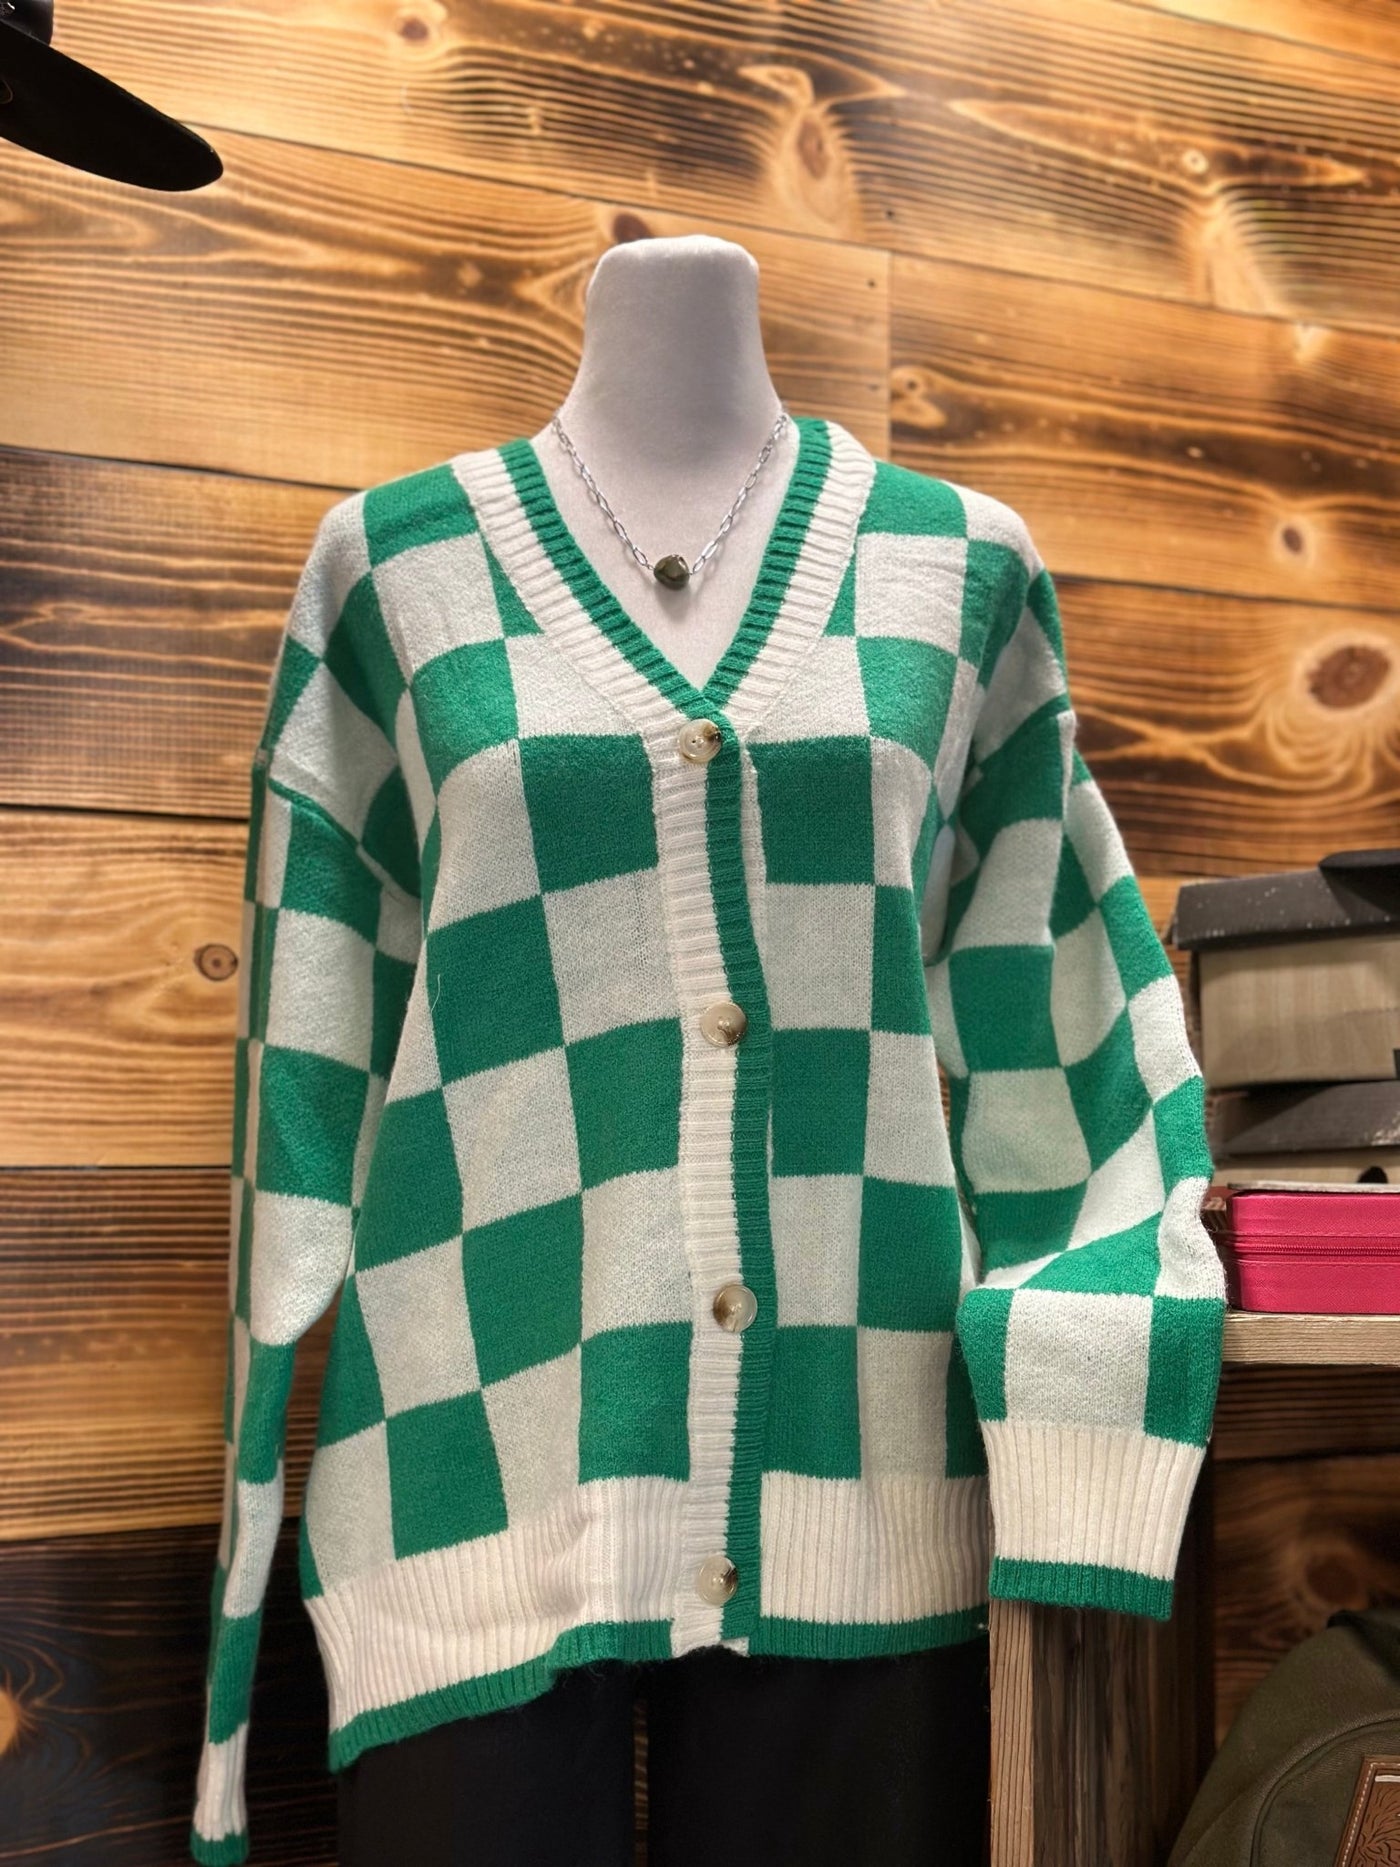 Shamrock Checkered Cardigan - The Frosted Cowgirls